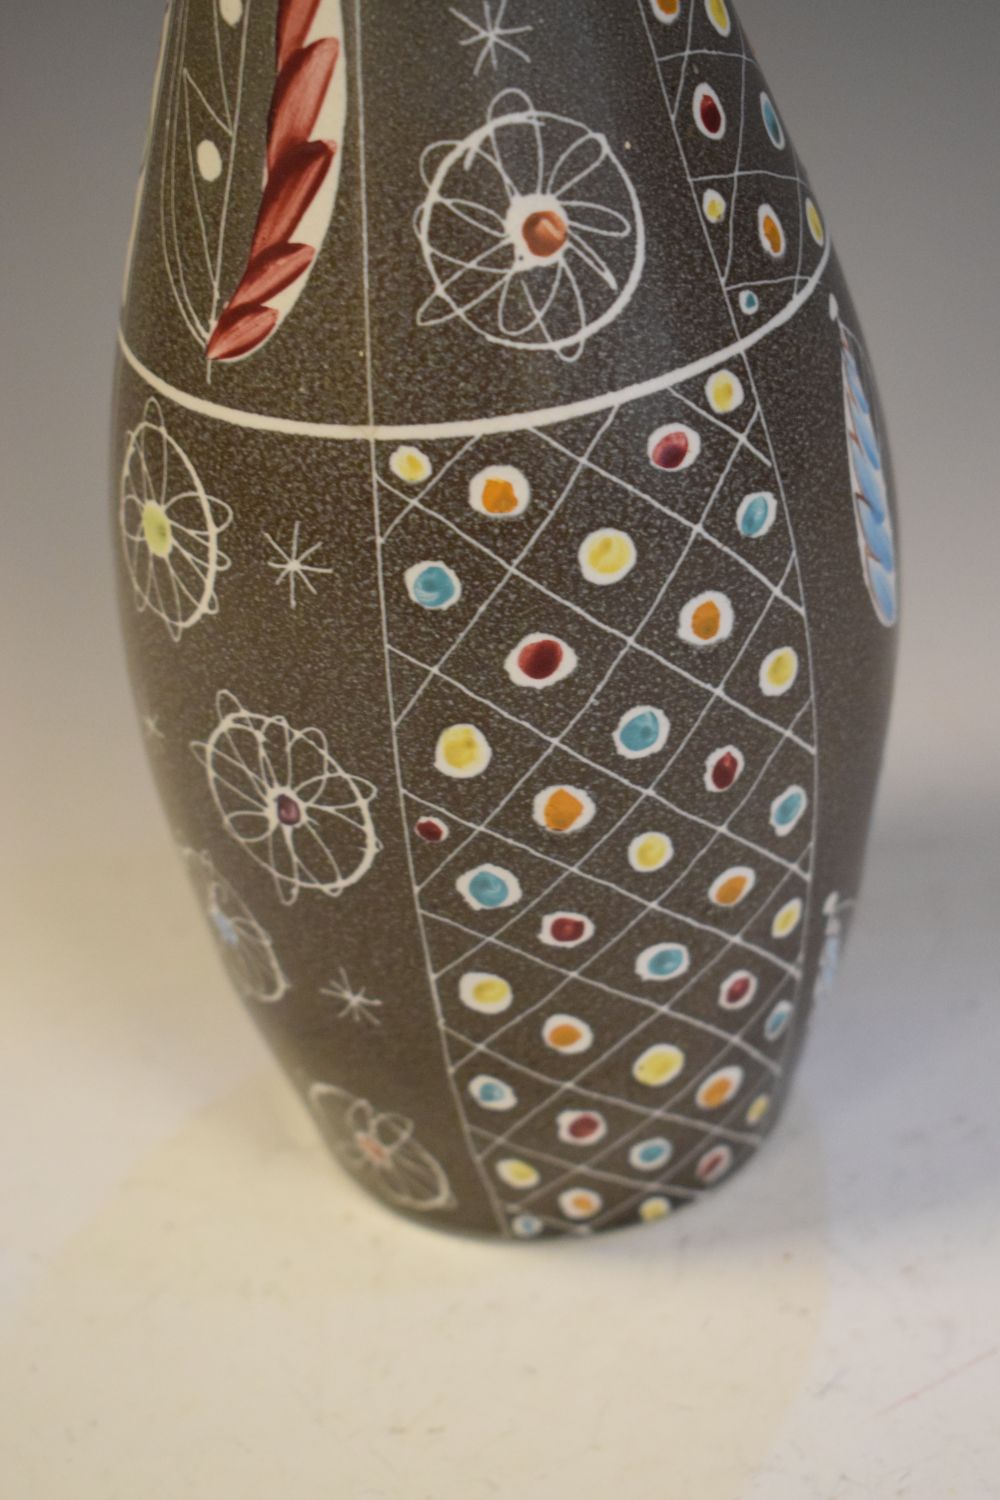 Denby Glyn Colledge retro pottery vase, 42cm high - Image 3 of 4